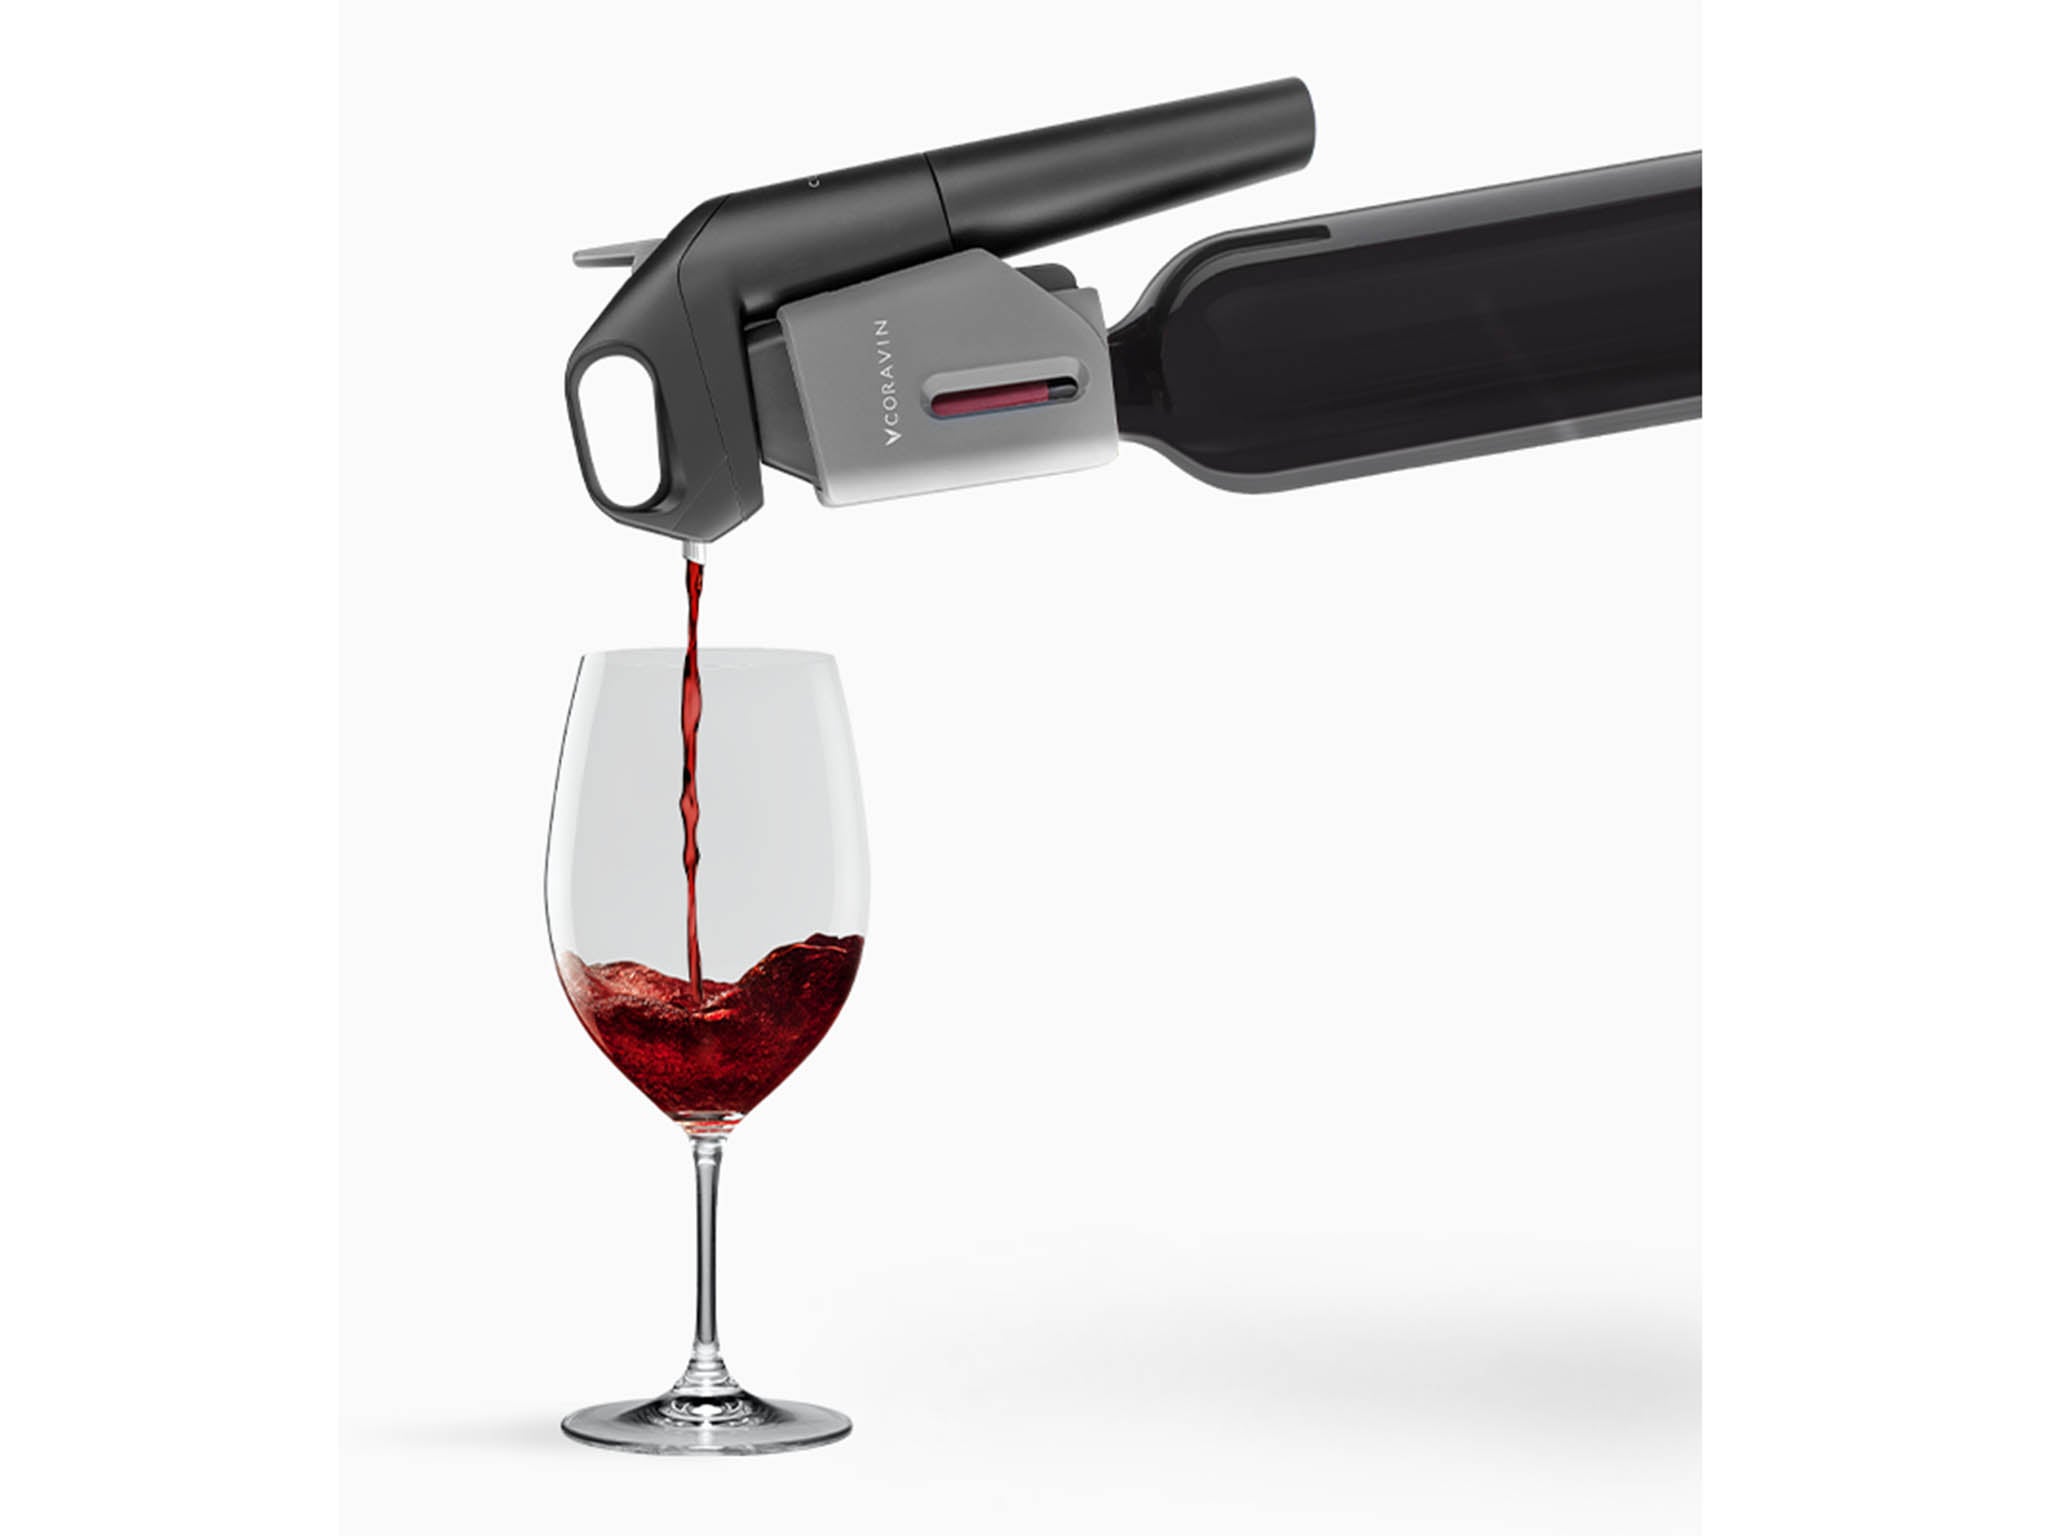 Easy to Use MEJAJU Stainless Steel Wine and Beer Bottle Opener Wing Corkscrew Heavy Duty 2 in 1 Corkscrew Remover 